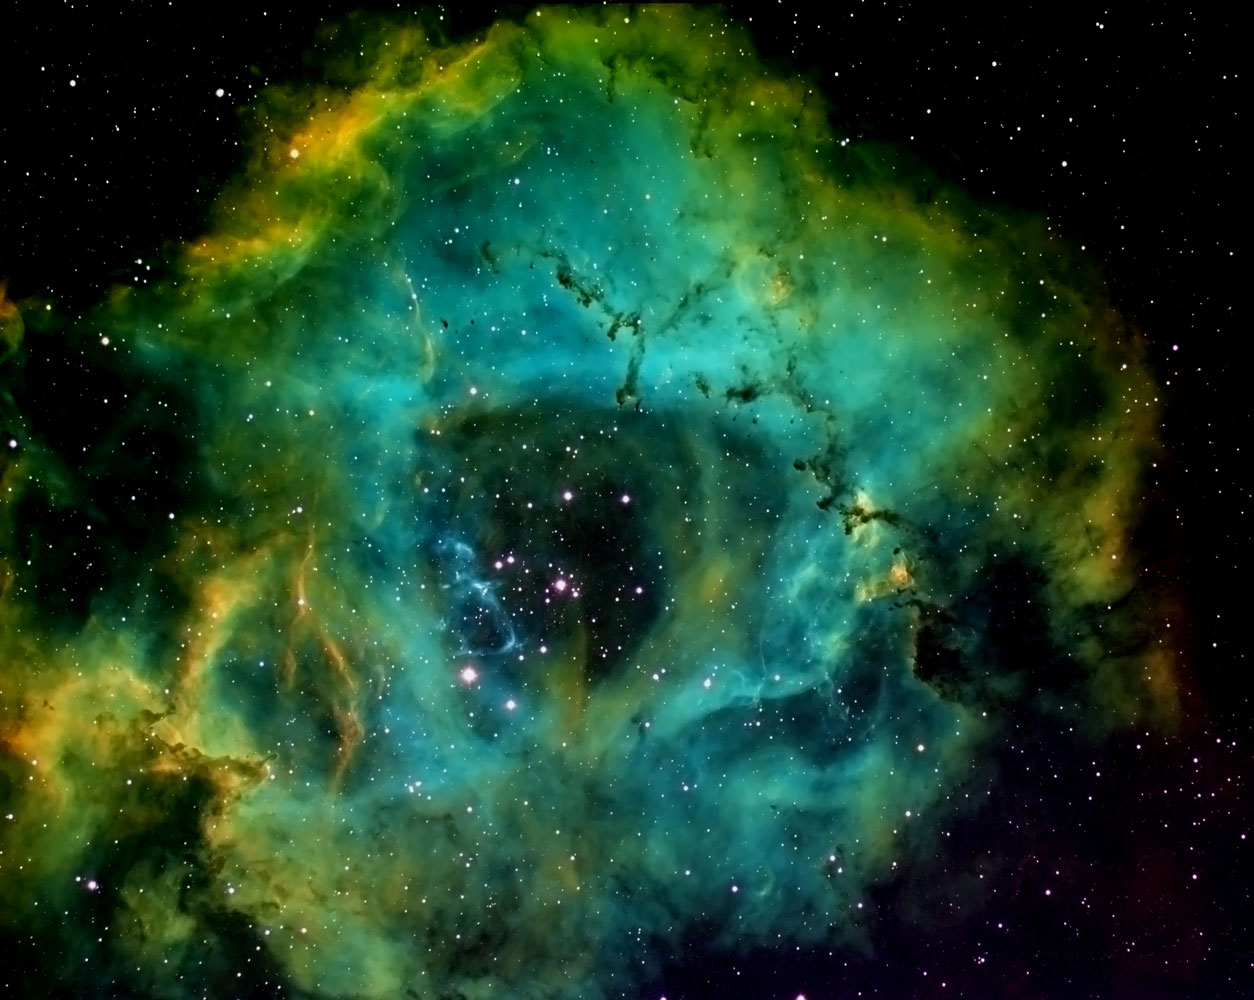 The Rosette nebula, also known as NGC 2237 or Caldwell 49, taken from Waukesha, Wisc., on Jan. 6, 2014.